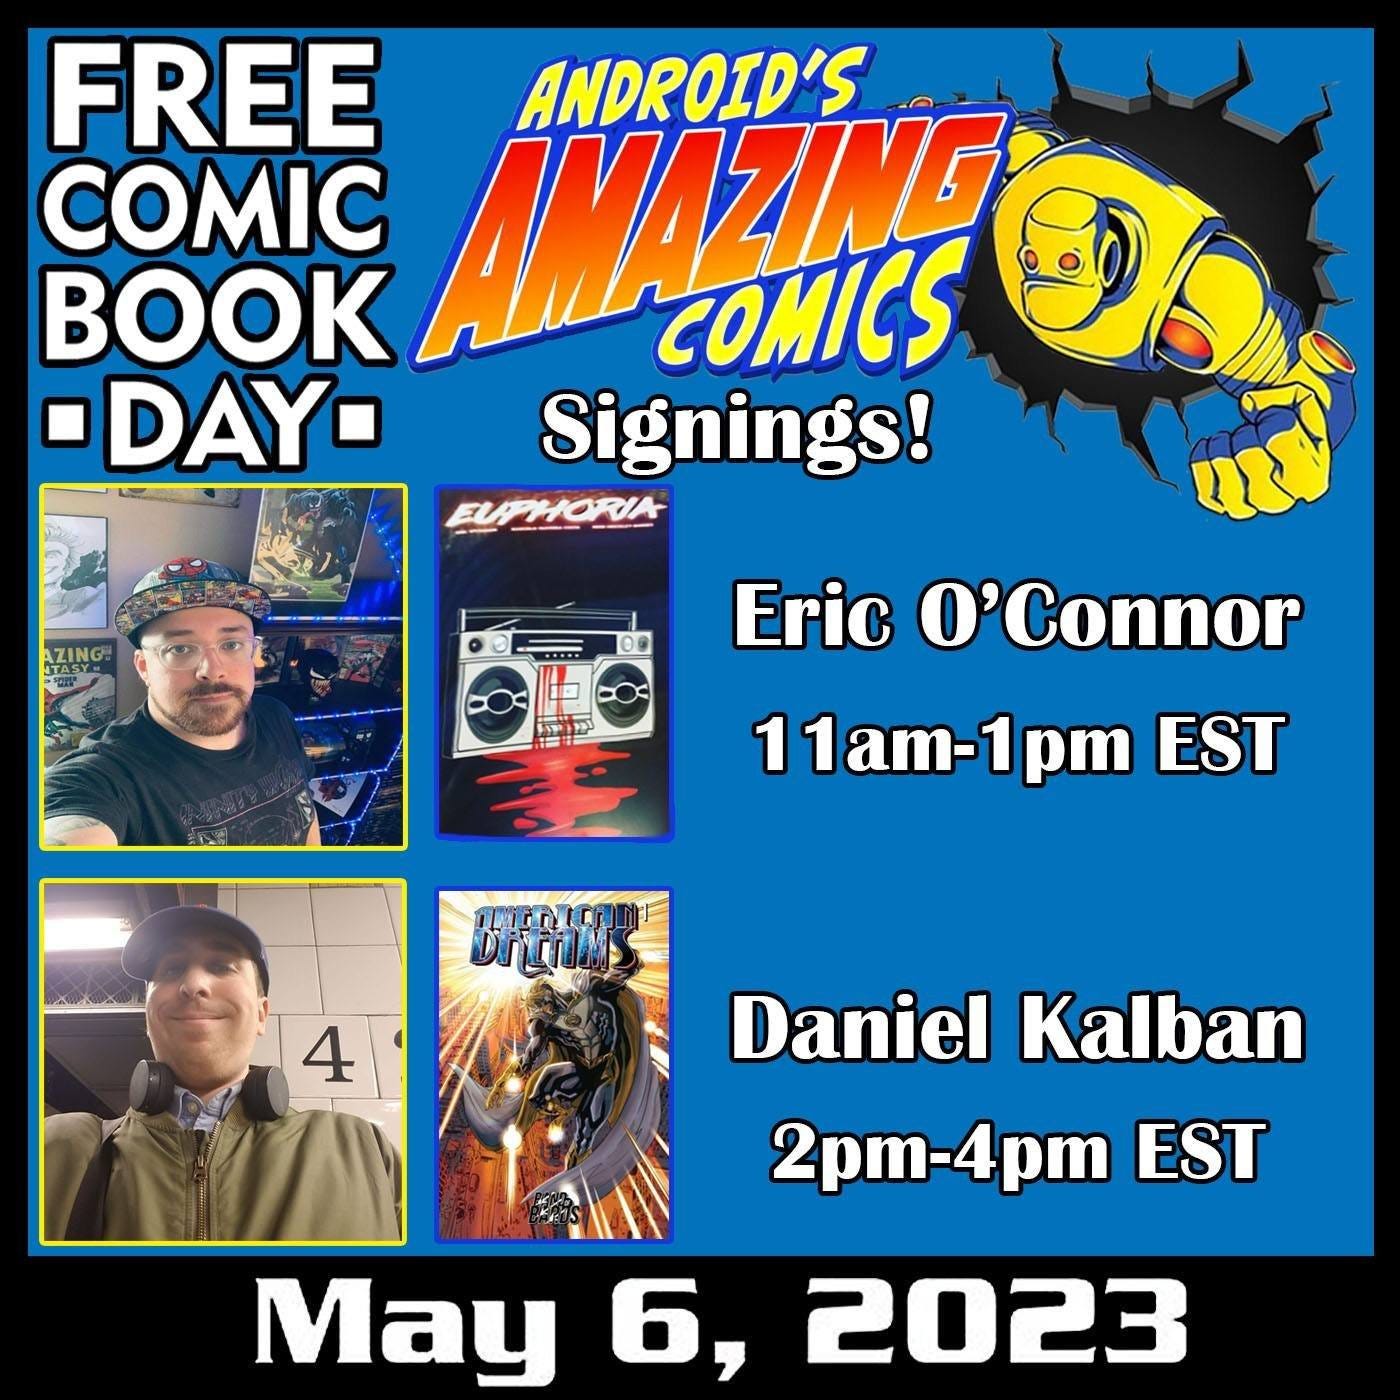 May be an image of 2 people and text that says 'FREE ANDROID'S COMIC BOOK AMAZINE COMICS DAY- Signings! ELPHORIA Eric O'Connor 11am-1pm EST OMENIO DiTTM 4 Daniel Kalban 2pm-4pm EST May 6, 2023'